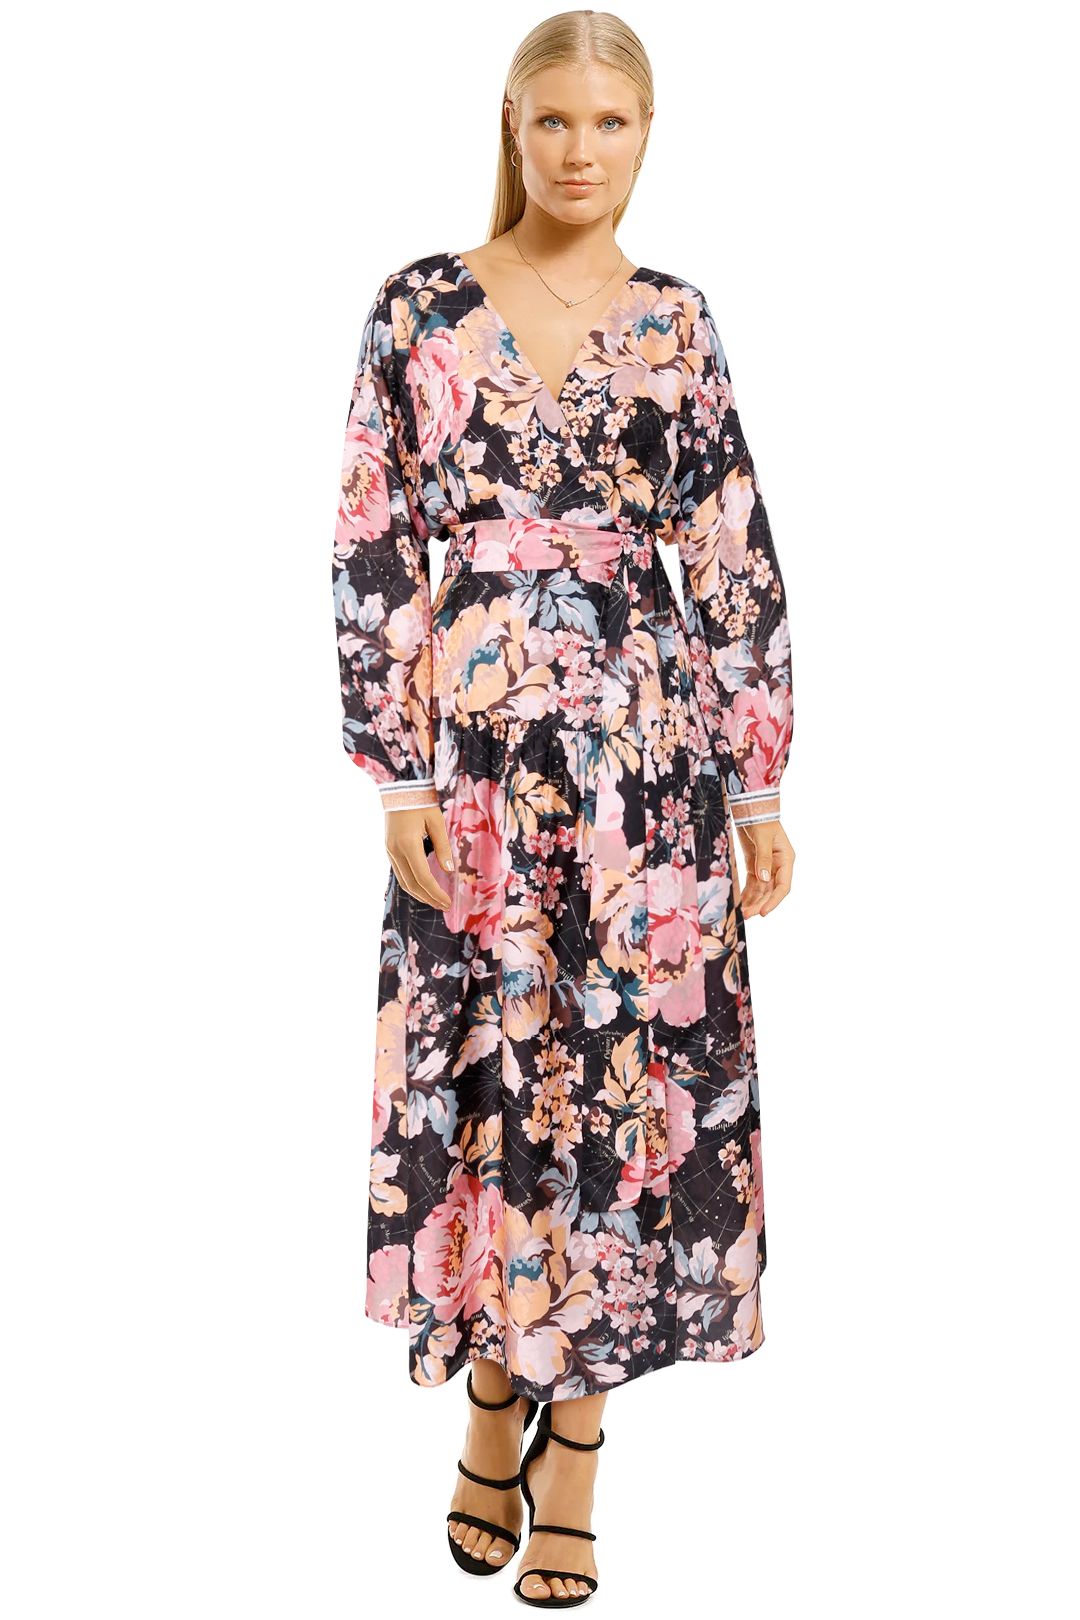 Floral Charts Wrap Dress by Ginger and Smart to Buy | GlamCorner